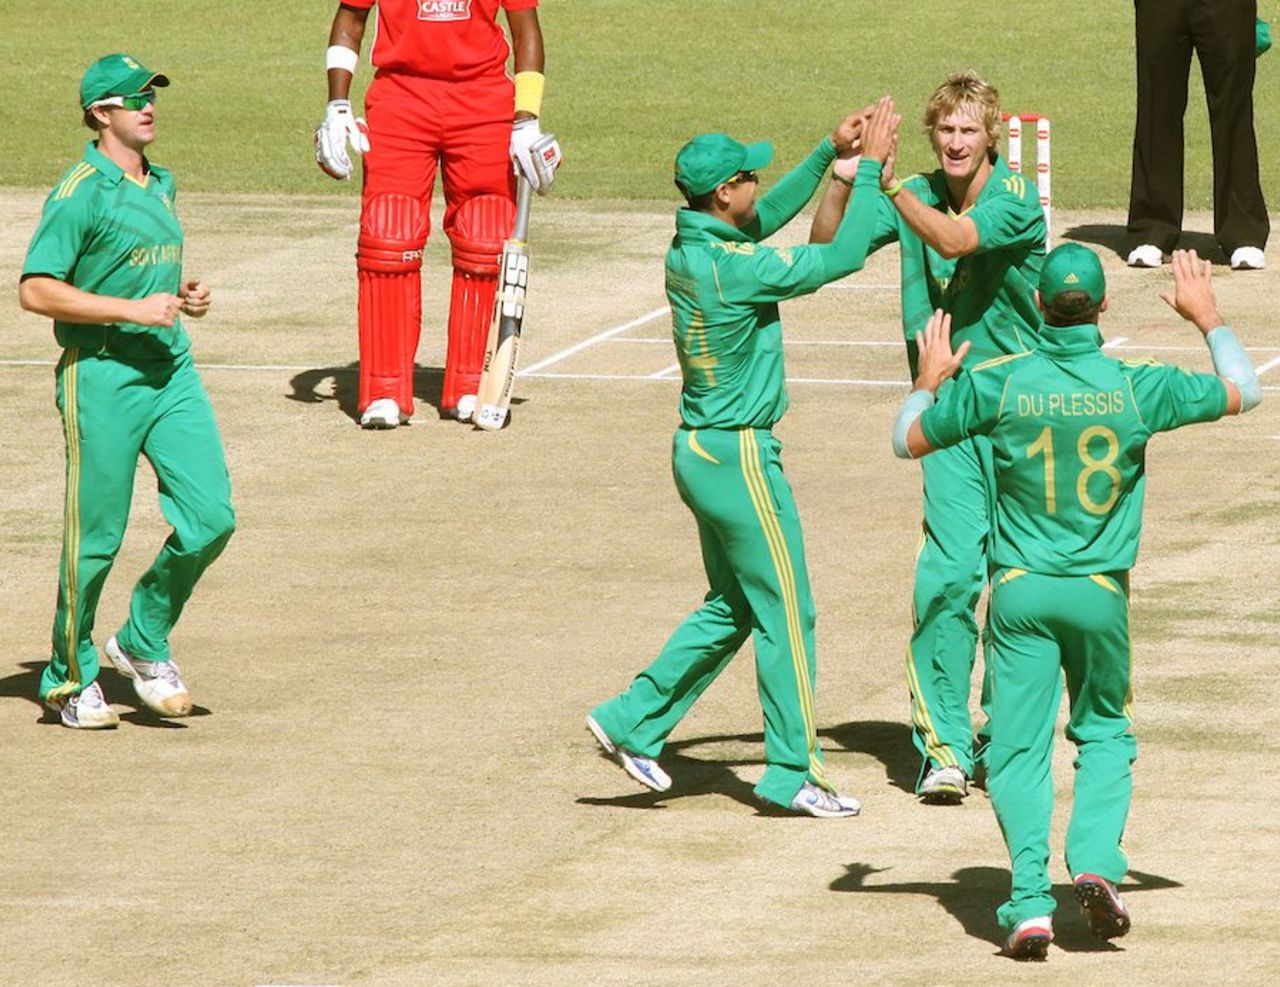 Chris Morris is congratulated by his team-mates, Zimbabwe v South Africa, T20 tri-series, Harare, June 23, 2012